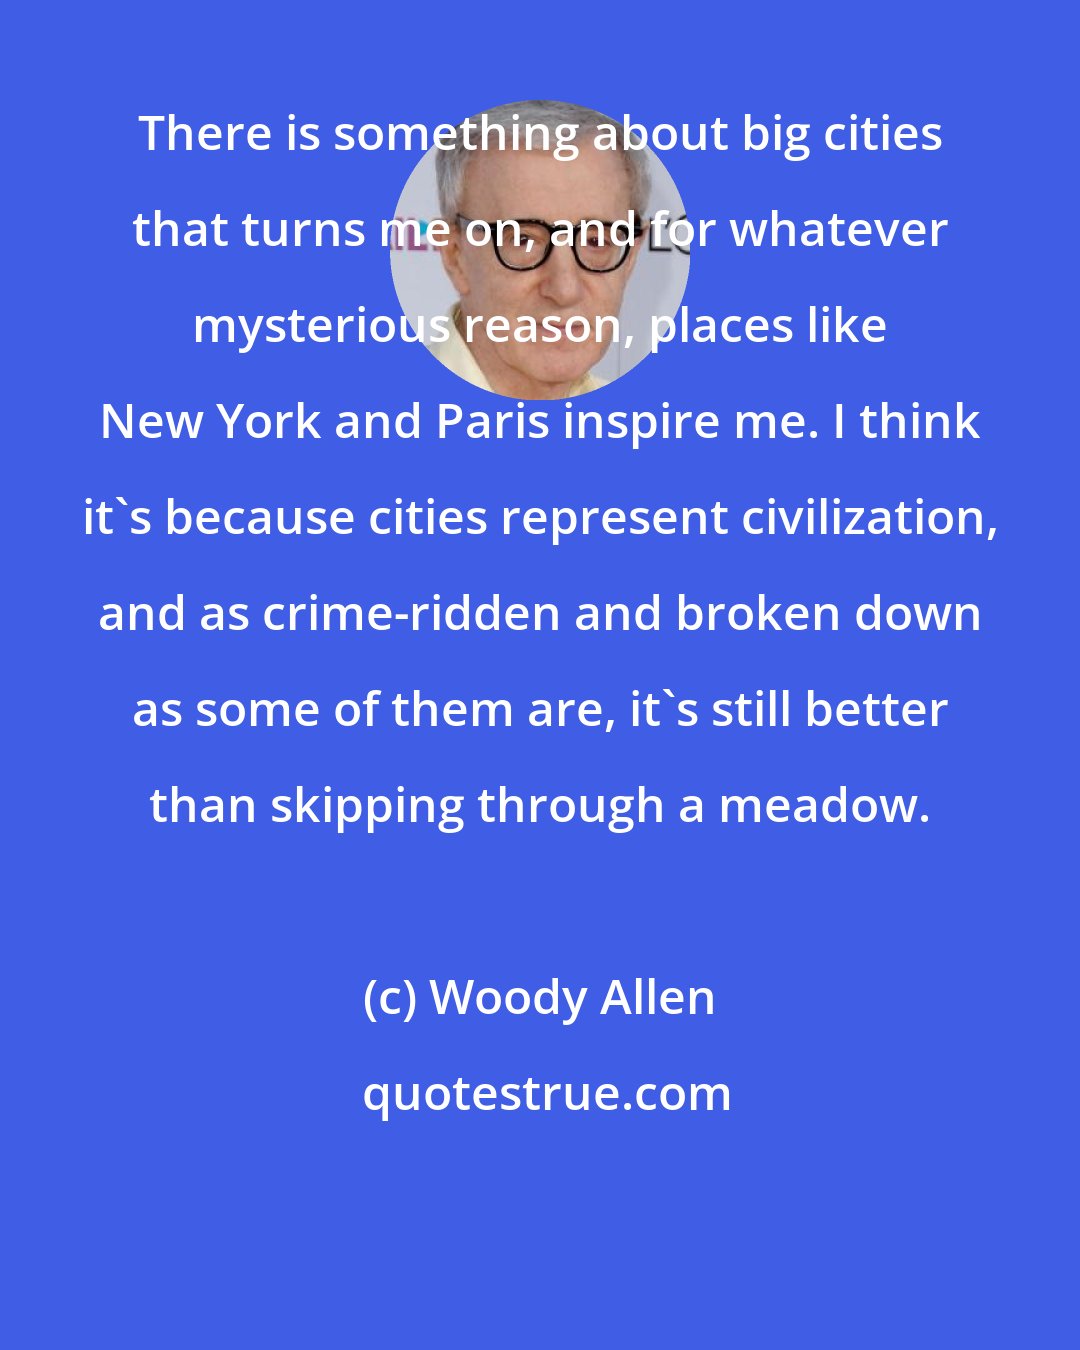 Woody Allen: There is something about big cities that turns me on, and for whatever mysterious reason, places like New York and Paris inspire me. I think it's because cities represent civilization, and as crime-ridden and broken down as some of them are, it's still better than skipping through a meadow.